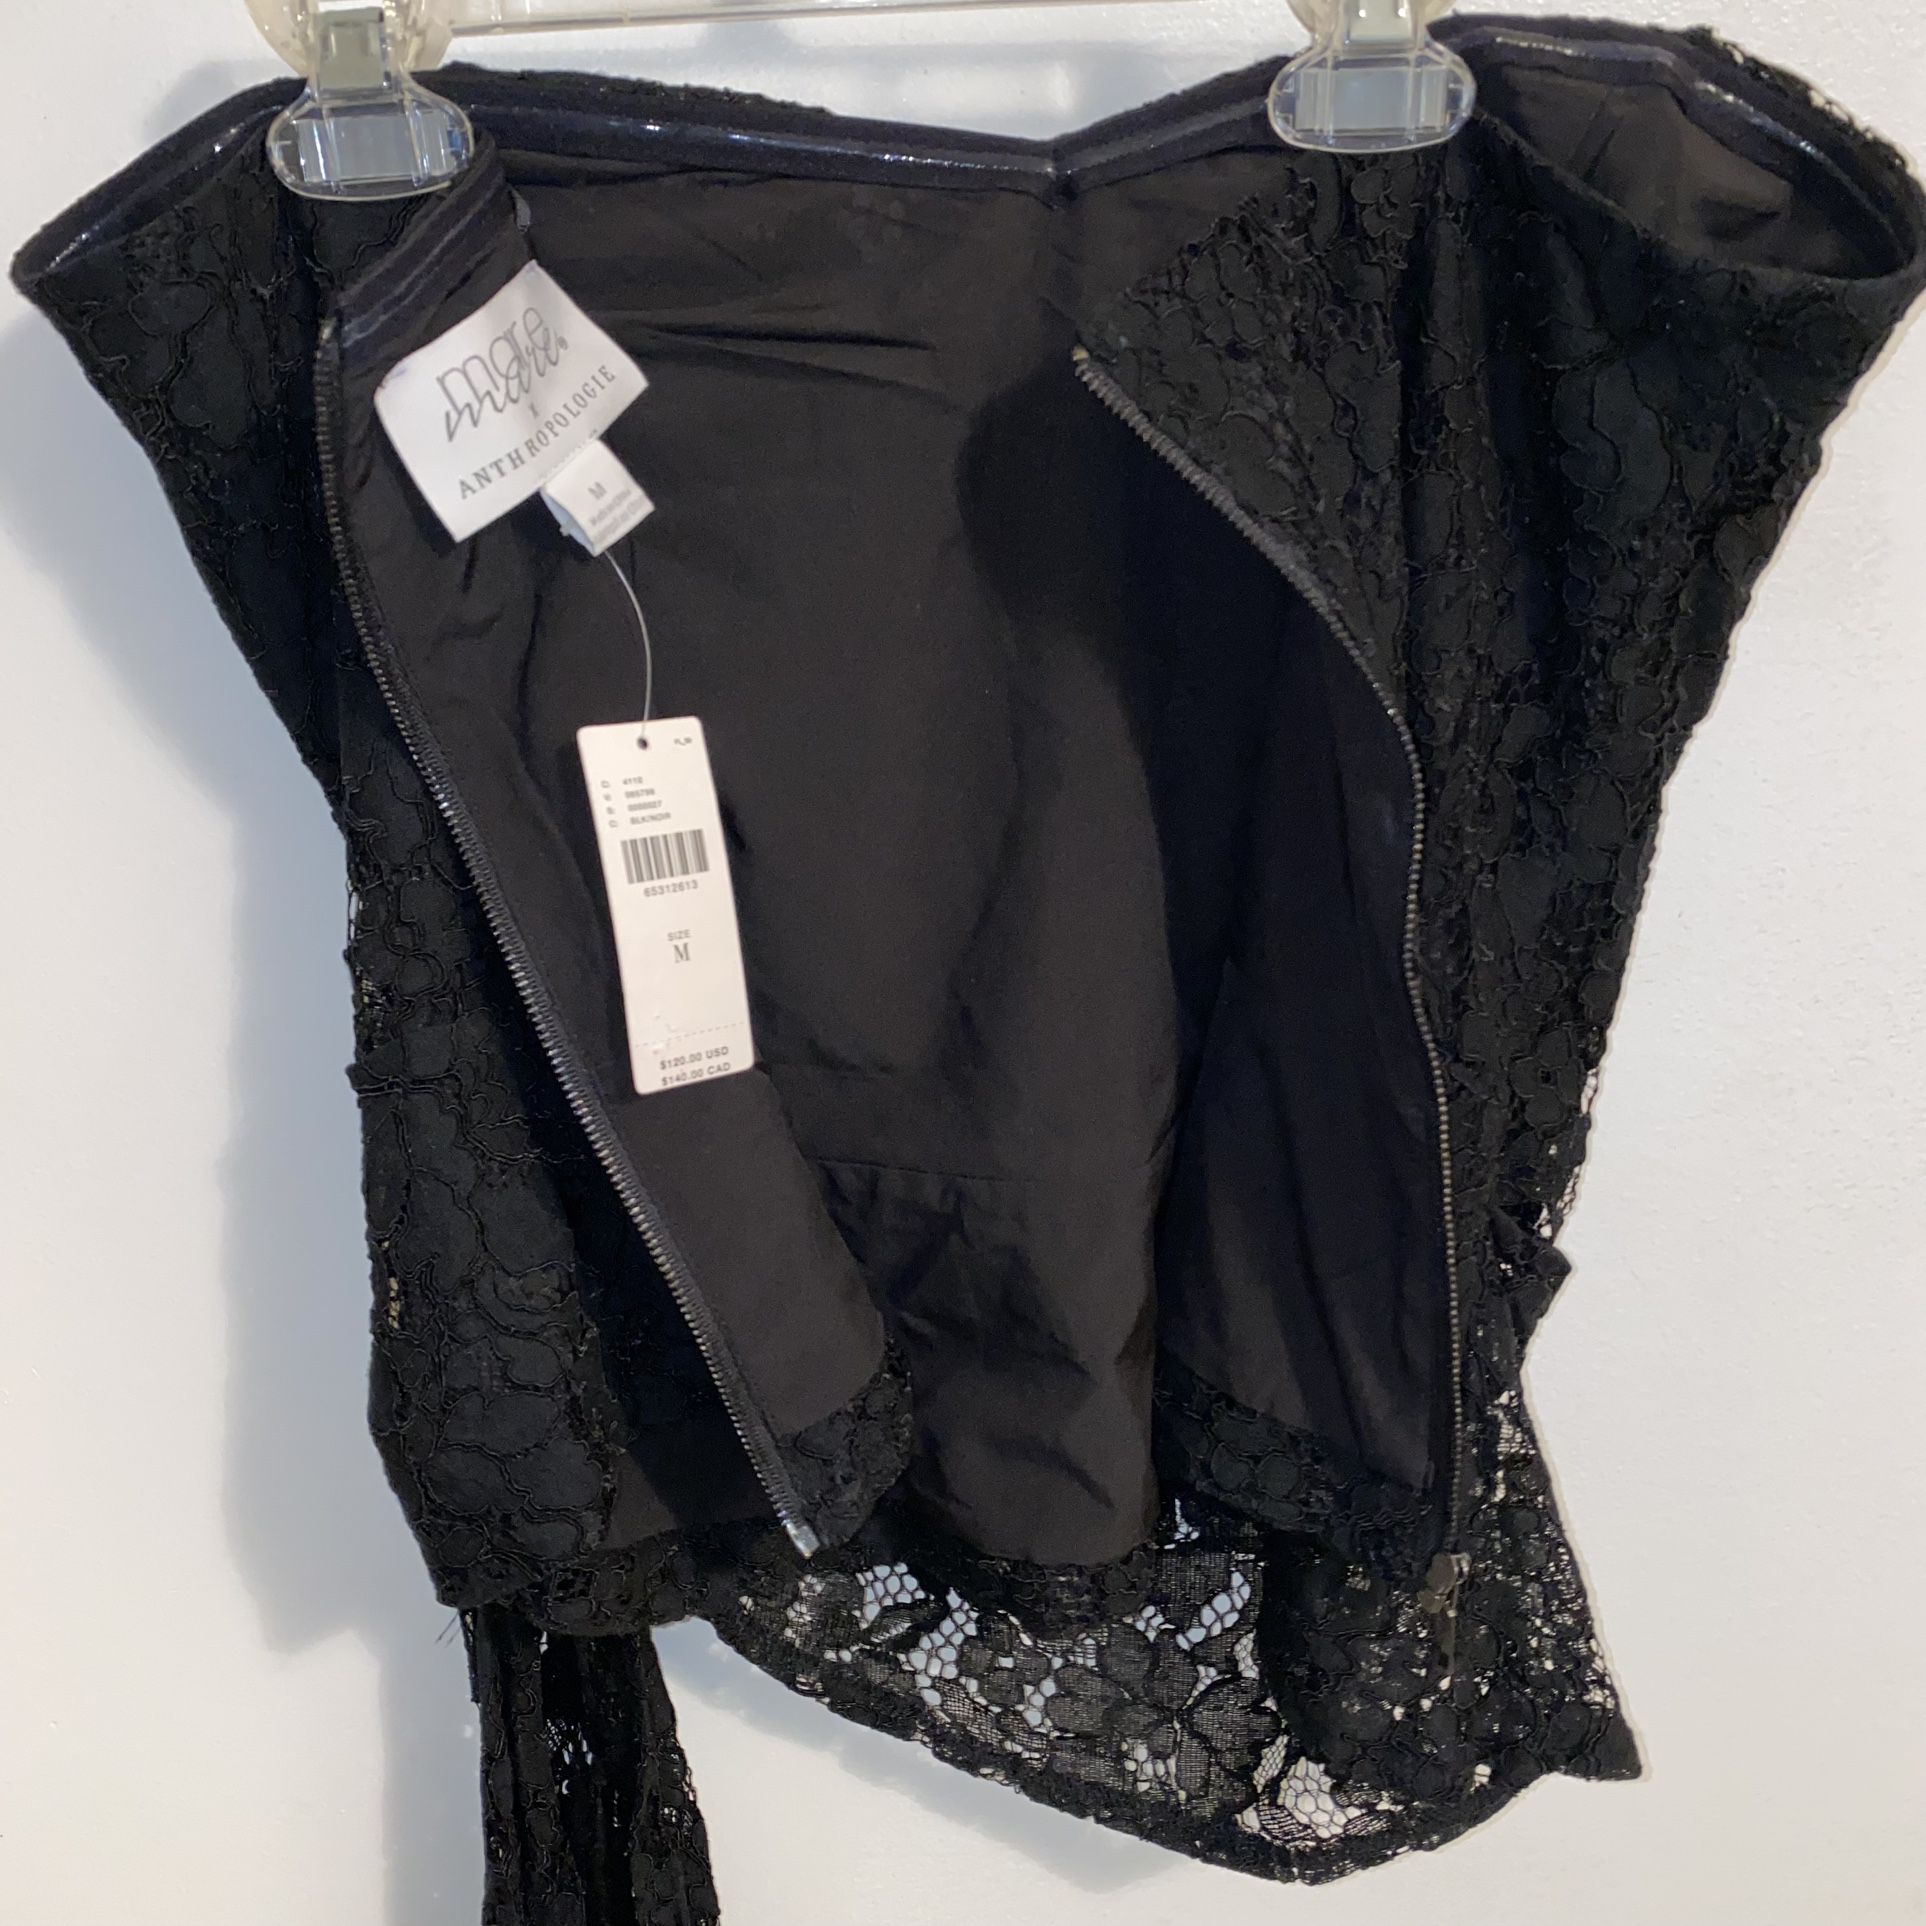 NWT $120 Anthropologie x Mare Mare Black Corseted Lace Adjustable Hem Tube Top M